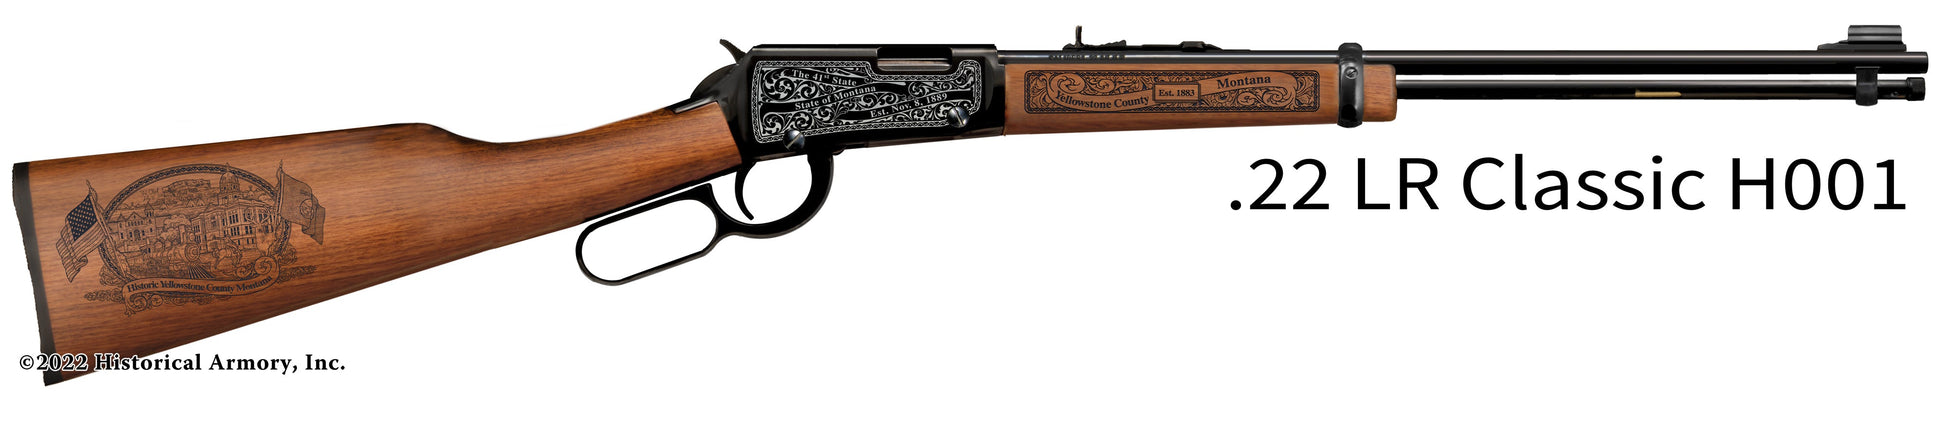 Yellowstone County Montana Engraved Henry H001 Rifle